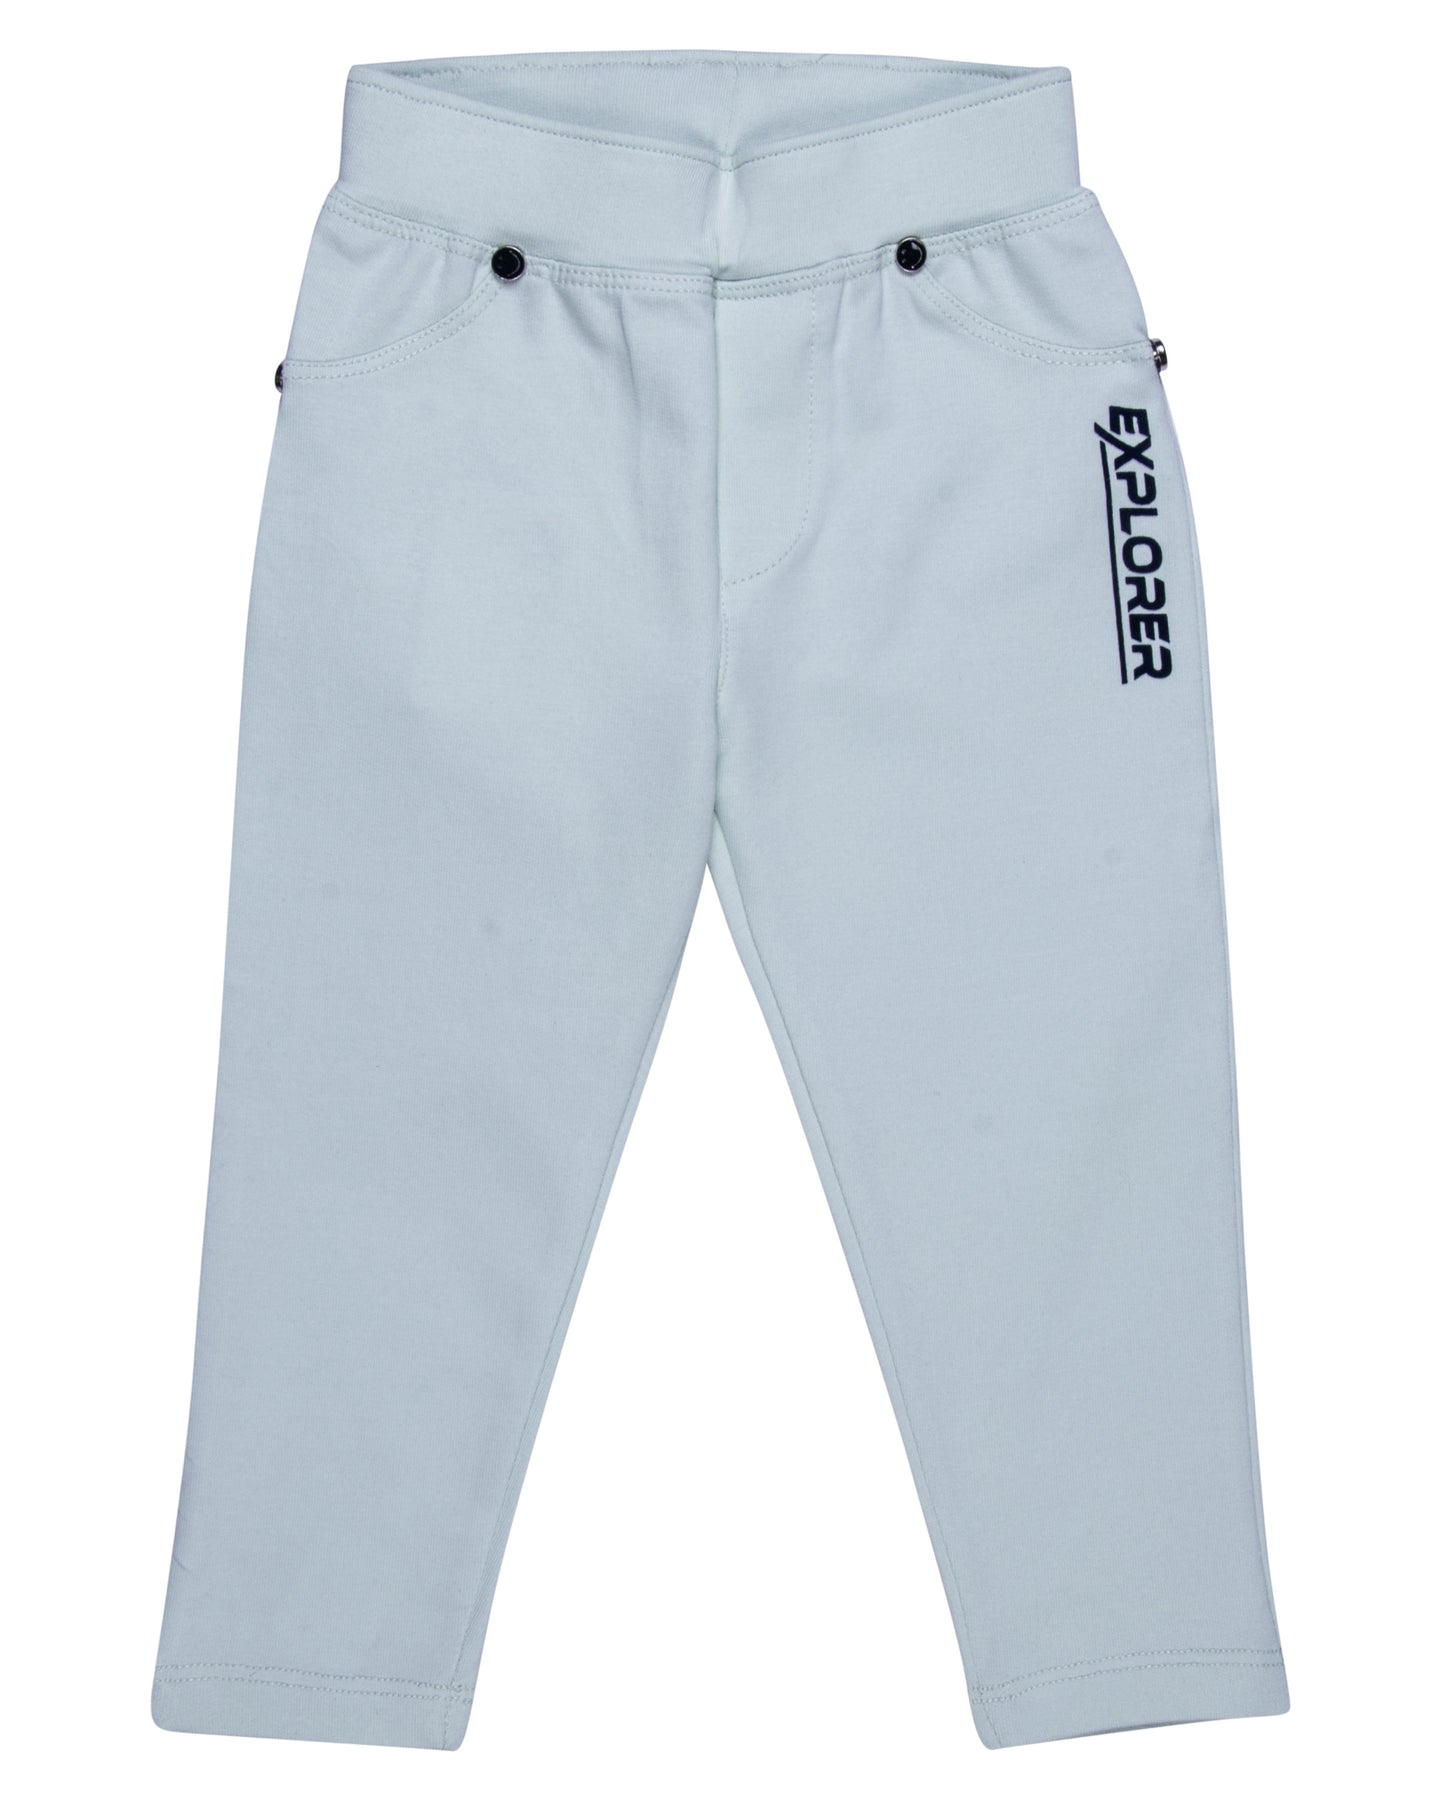 Girls Stretchable Light Green Track Pant